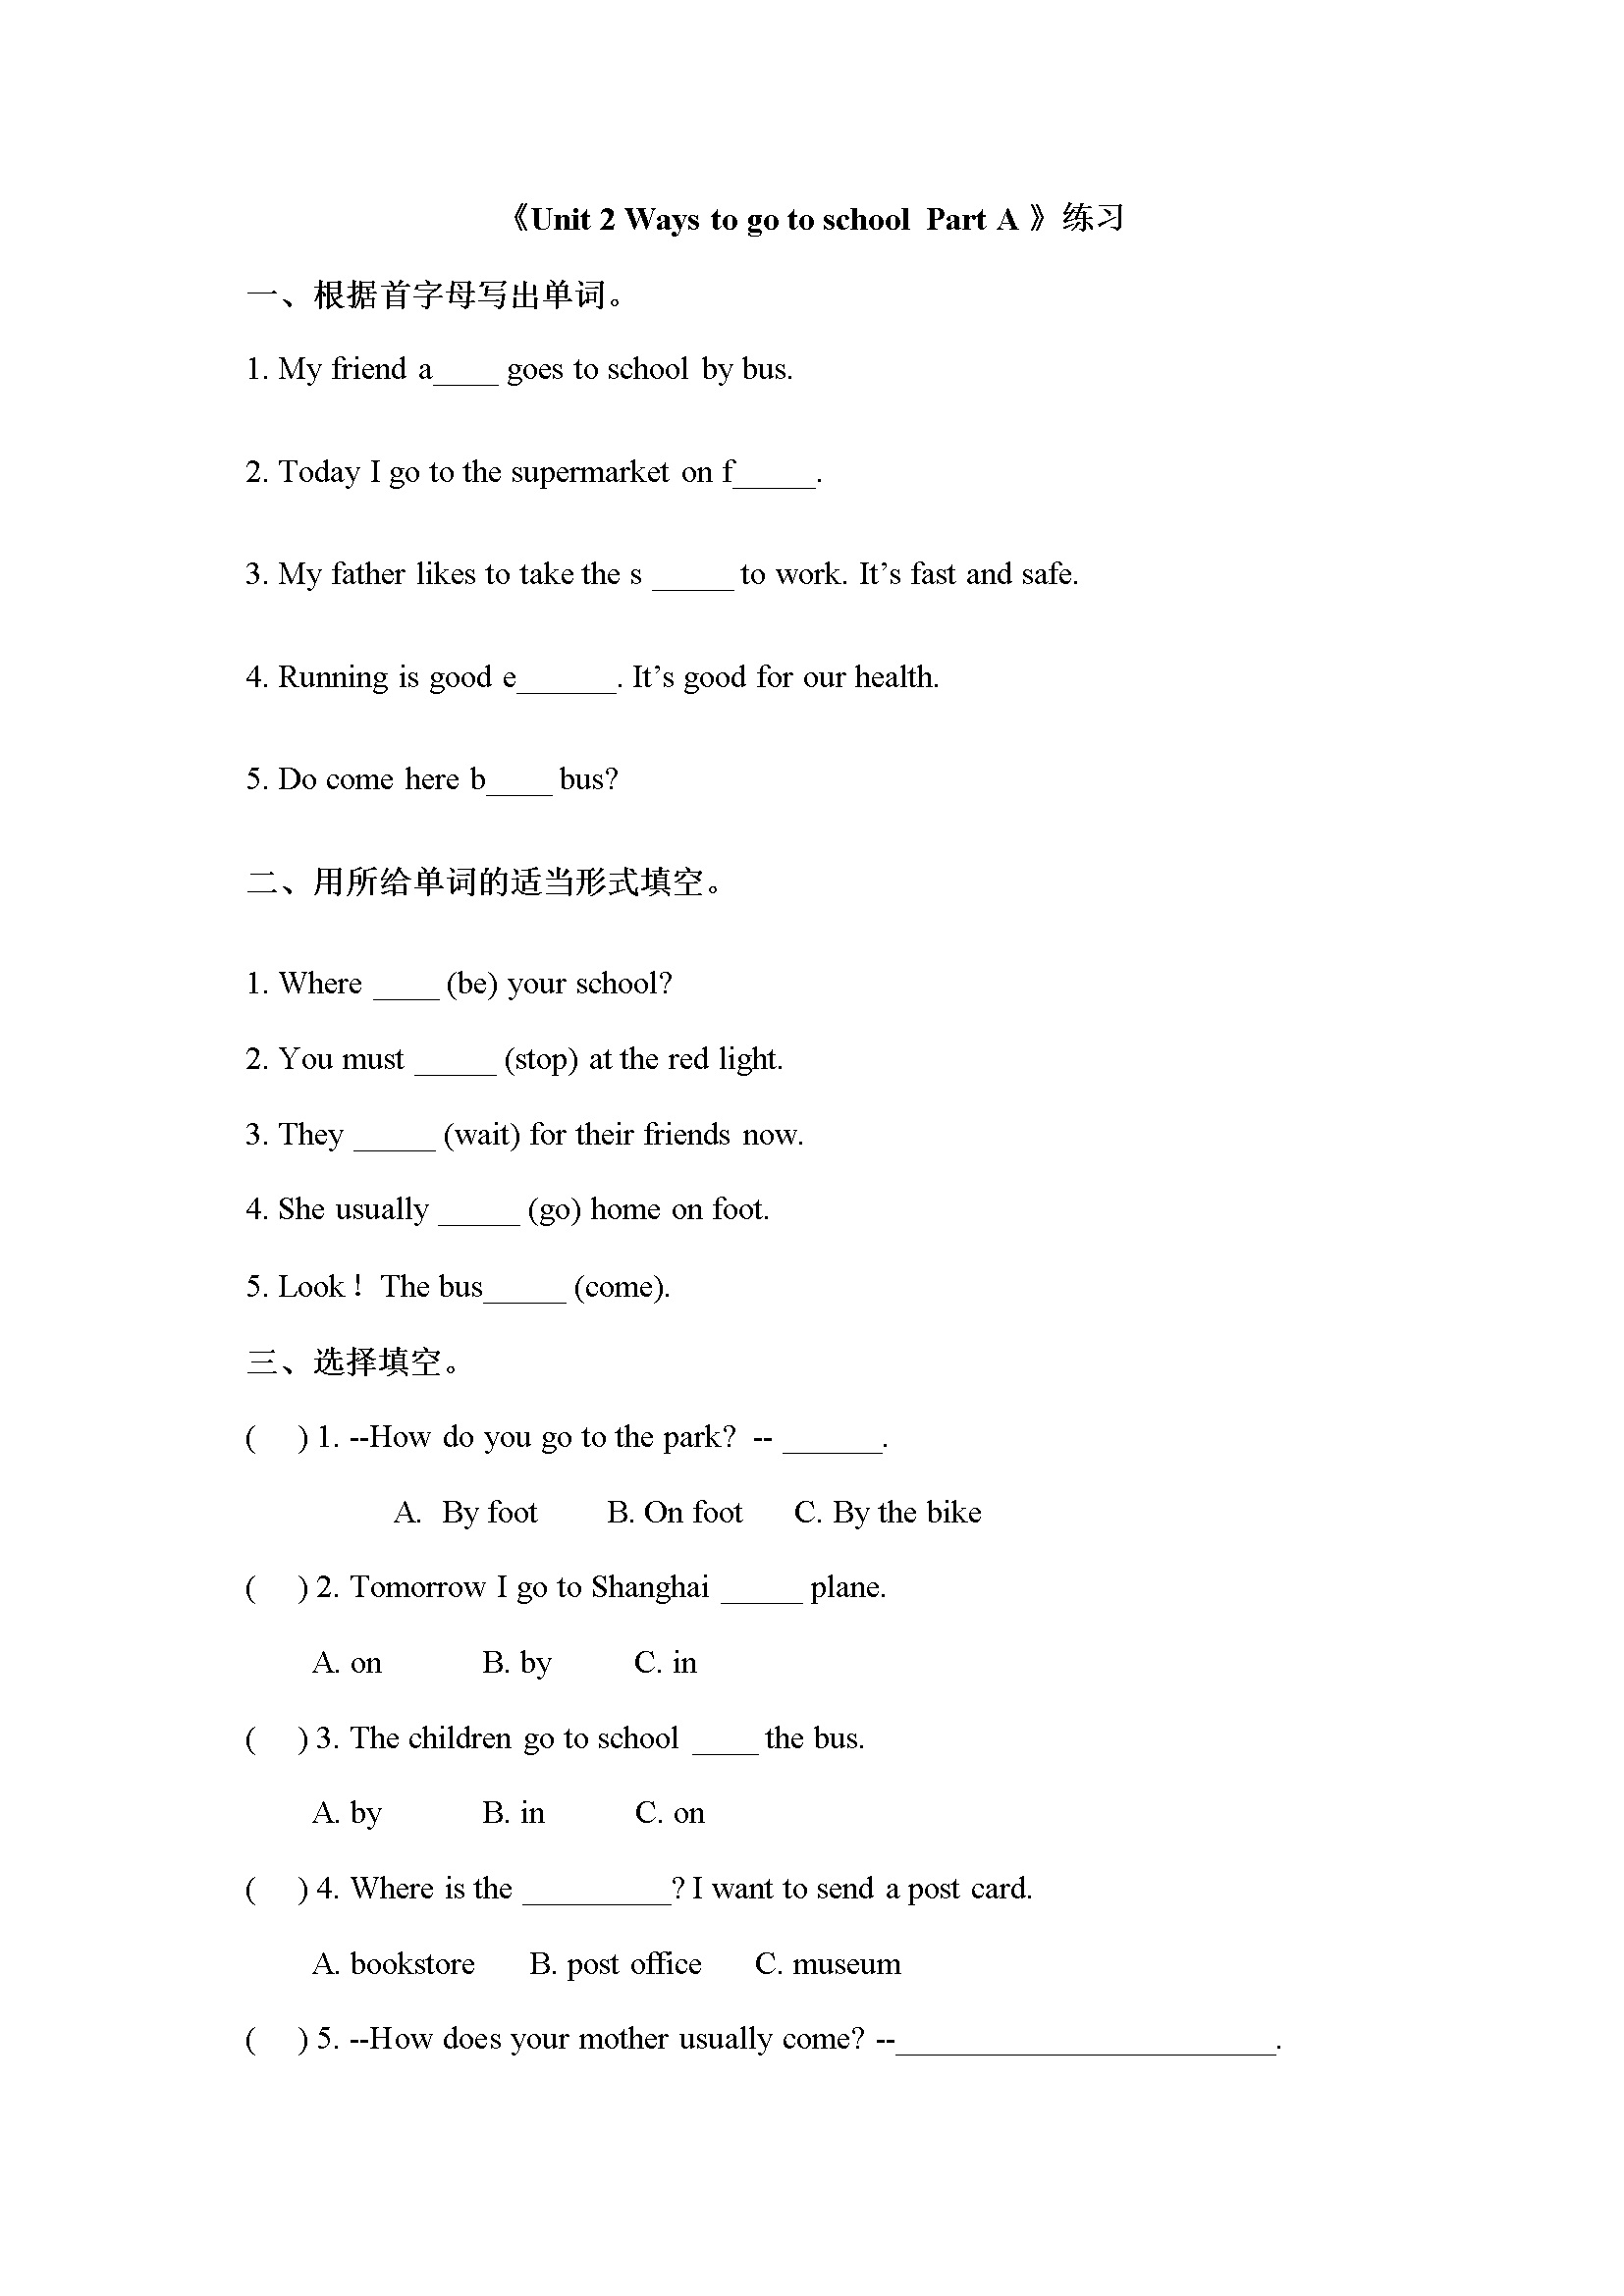 Unit 2 ways to go to school part A- 人教（PEP)